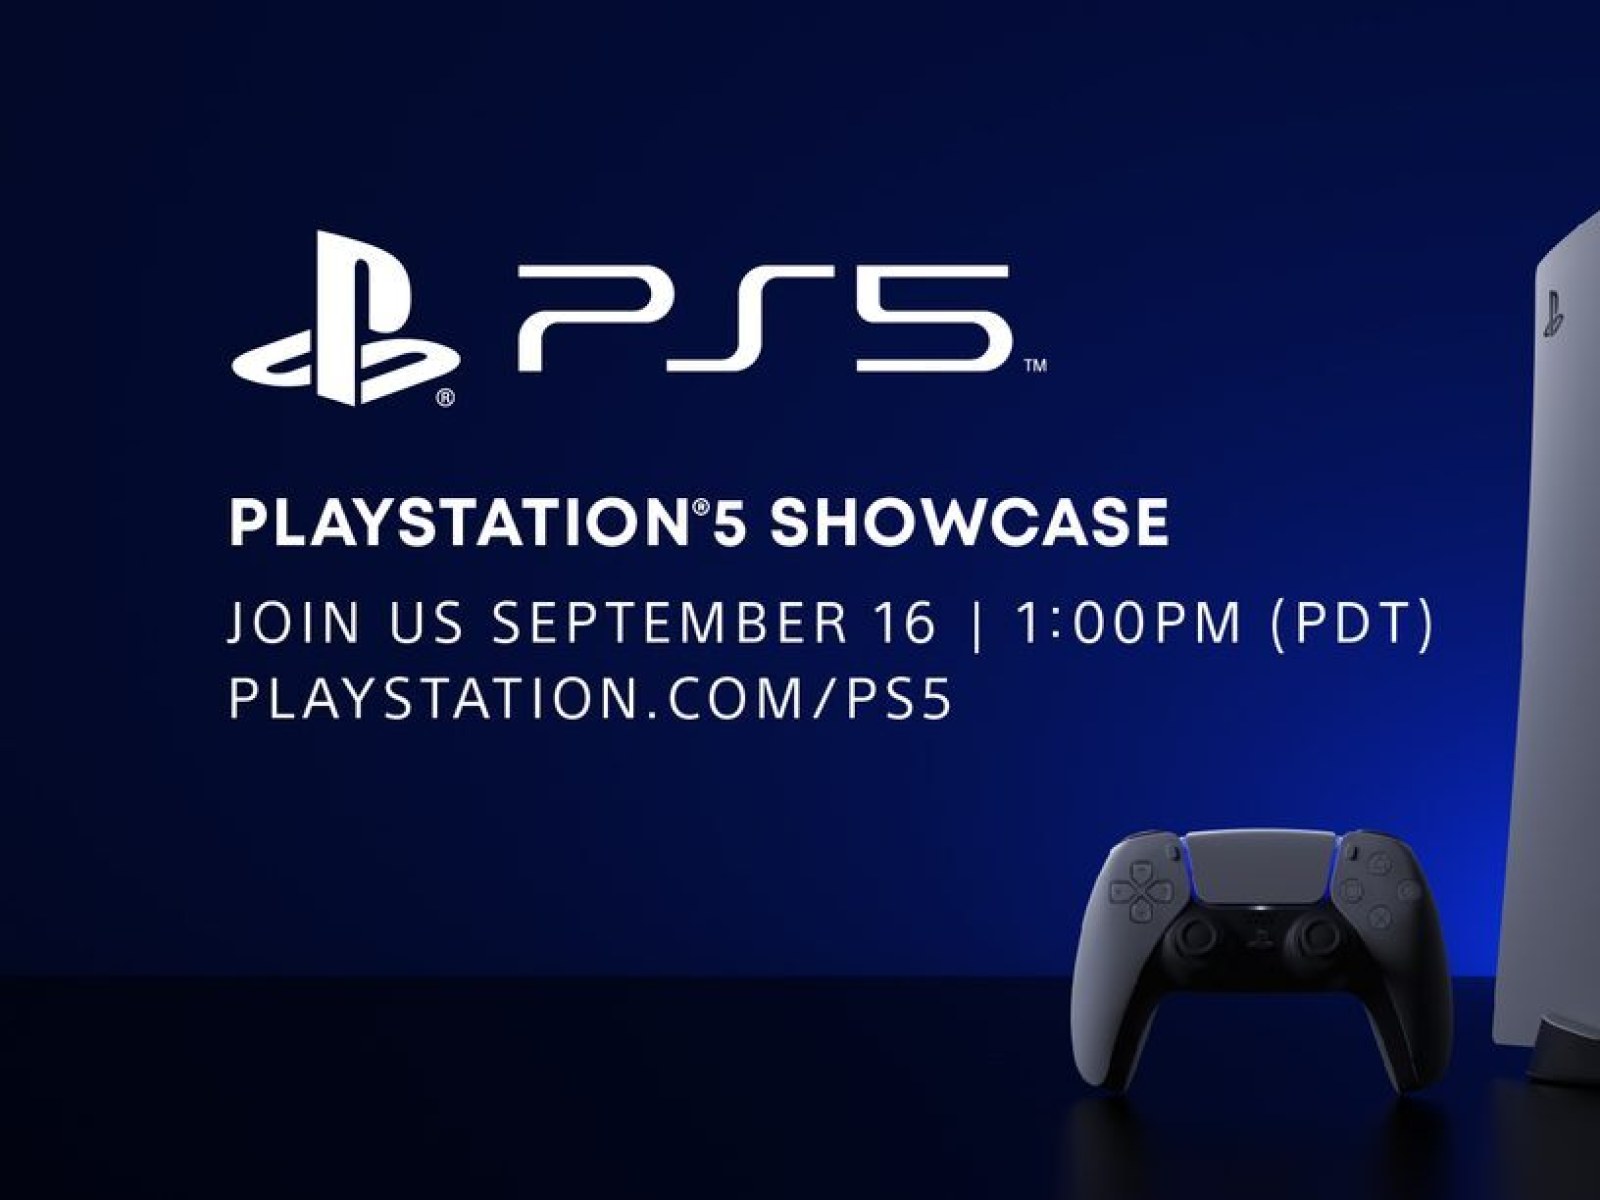 PS5 Games Event Set For 16 - Are Price & Release Date